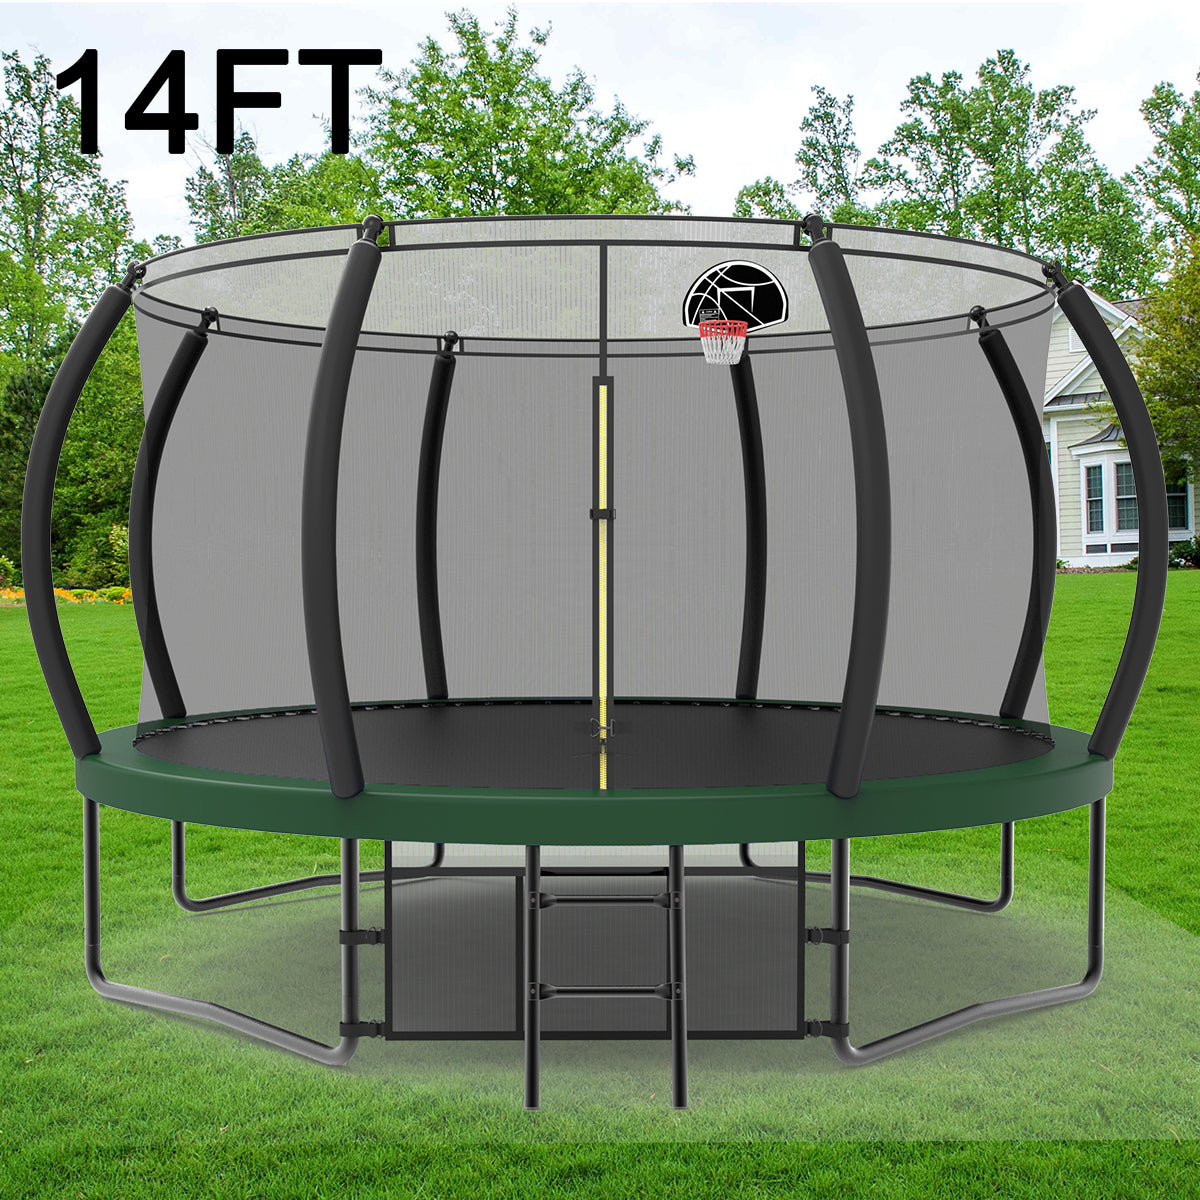 14 Foot Trampoline with Basketball Hoop, Kids Adults 1320LBS Trampoline Outdoor with Safety Enclosure Net, Heavy Duty Jumping Mat & Spring Cover Padding, Kids Christmas Gifts, ASTM Approved-Green